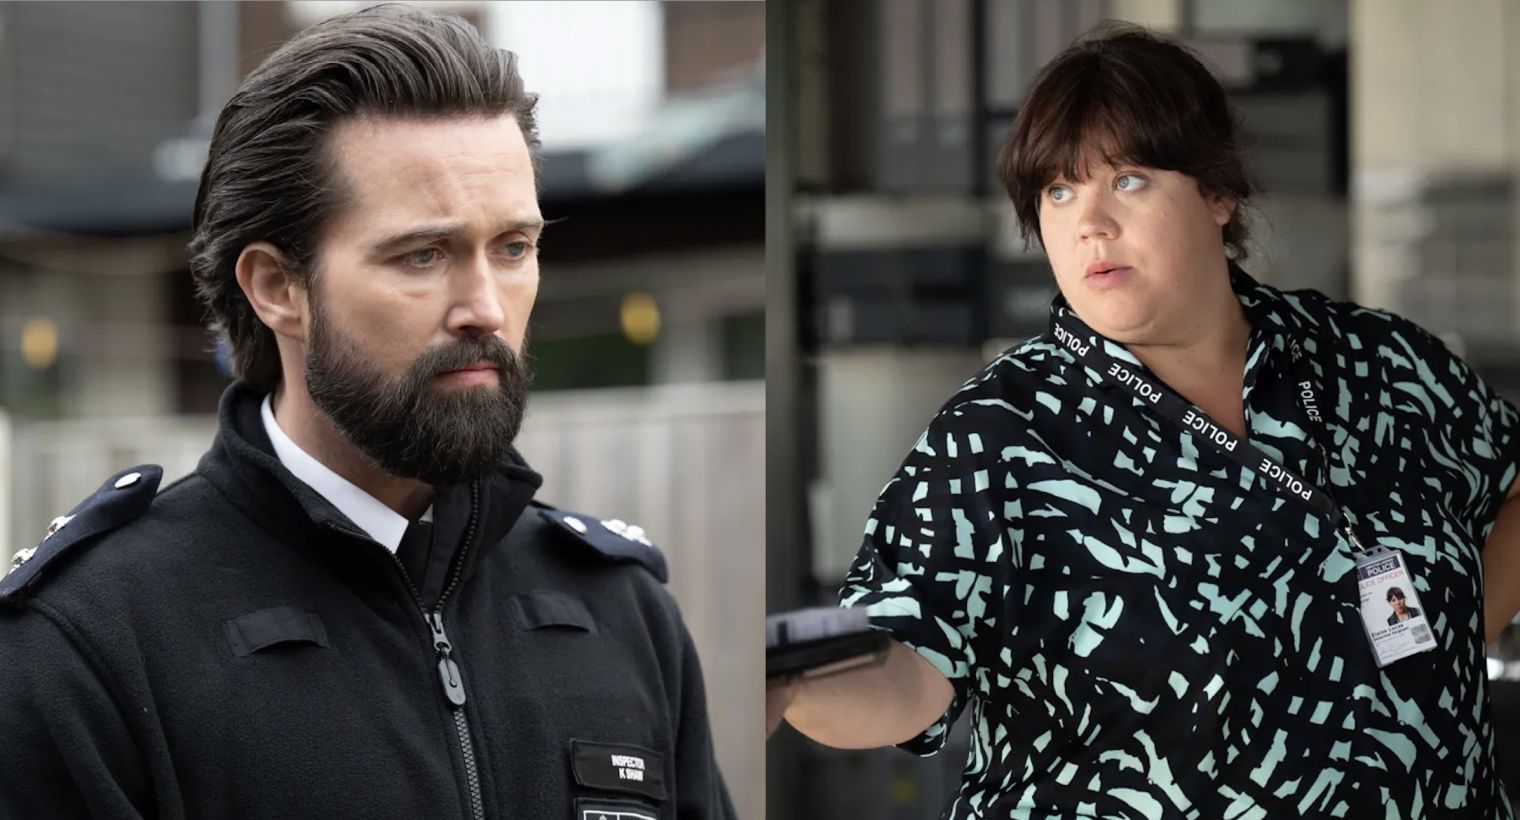 Emmett J. Scanlan returns as DI Kieran Shaw in The Tower II: Death Message which premieres on ITV1 tonight at 9pm